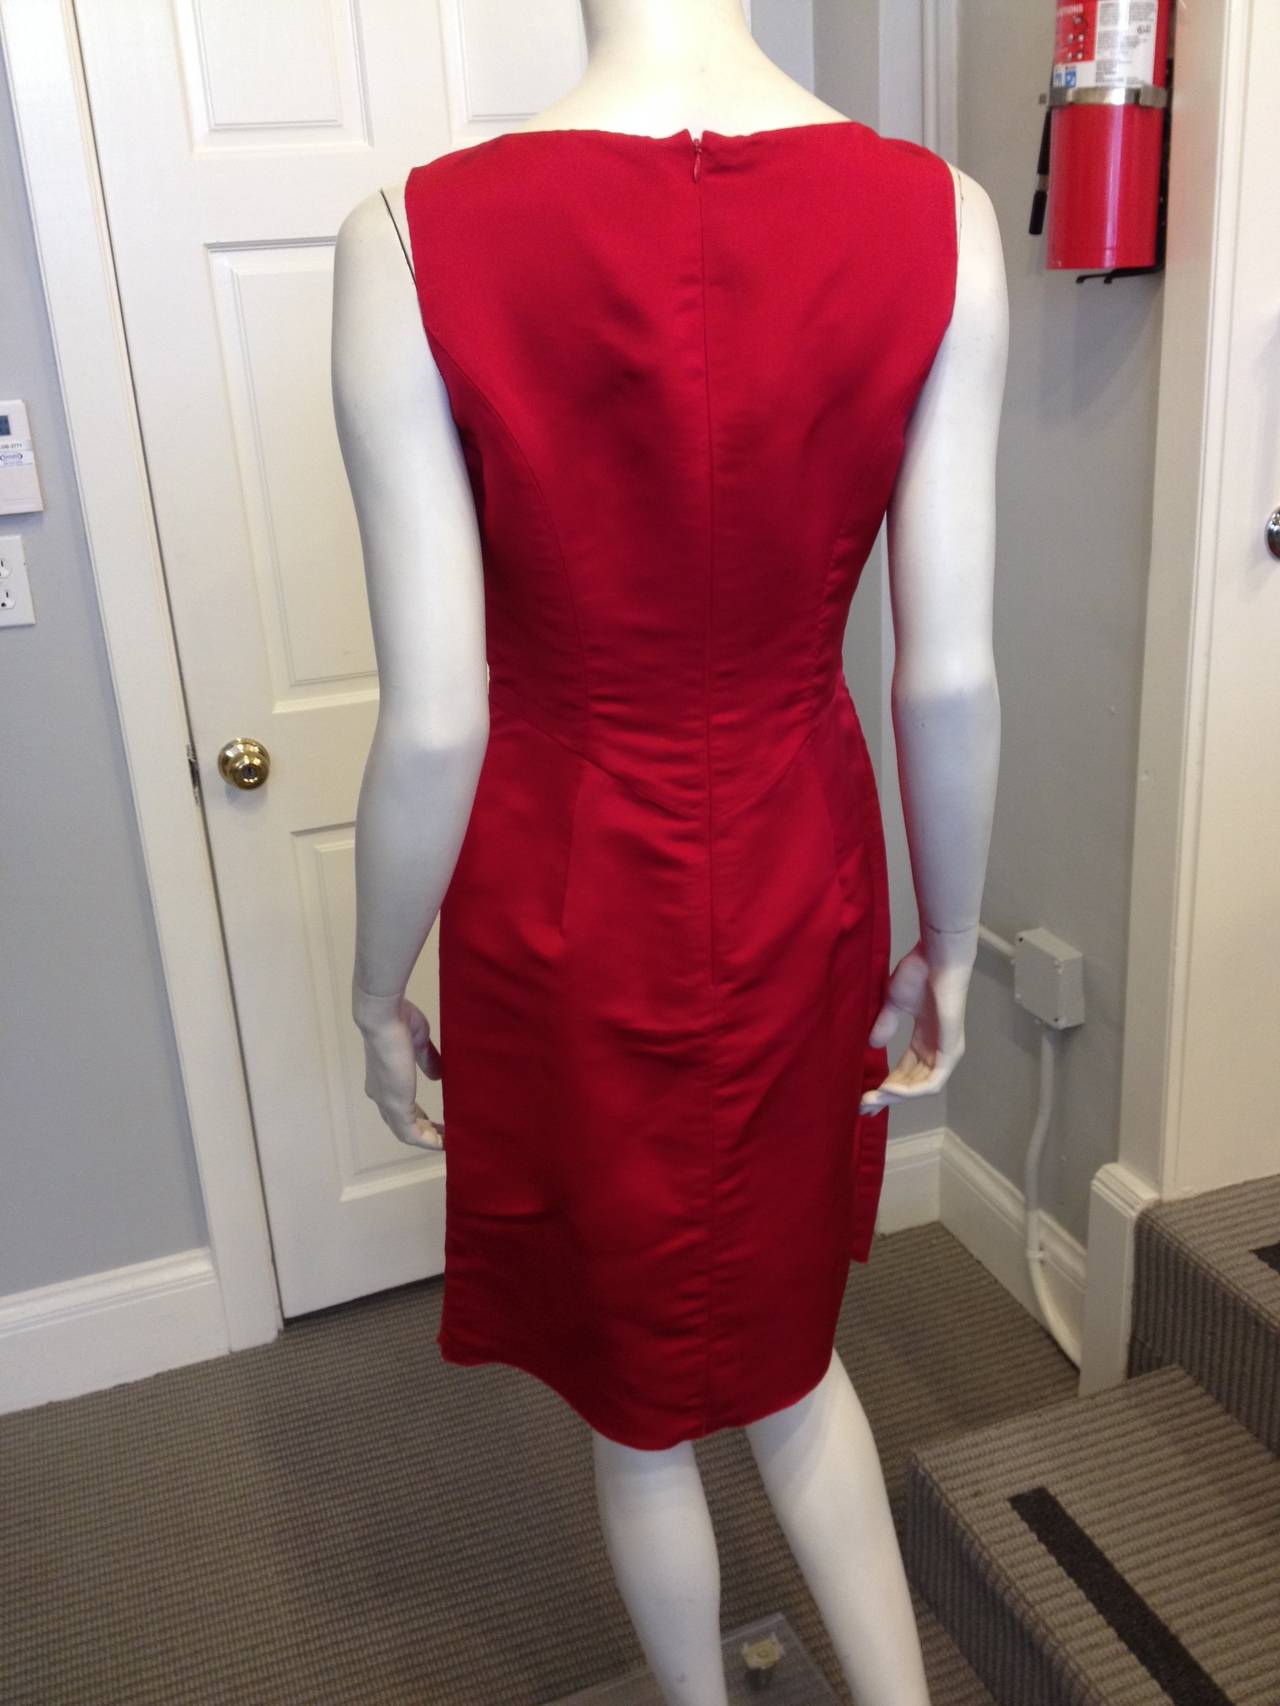 From one of the pillars of American elegance. The silk twill is resplendent in bright fire engine red, and the beautiful tailoring cuts a perfect hourglass shaped silhouette. The gentle pentagonal neckline and sweetheart seams are feminine and